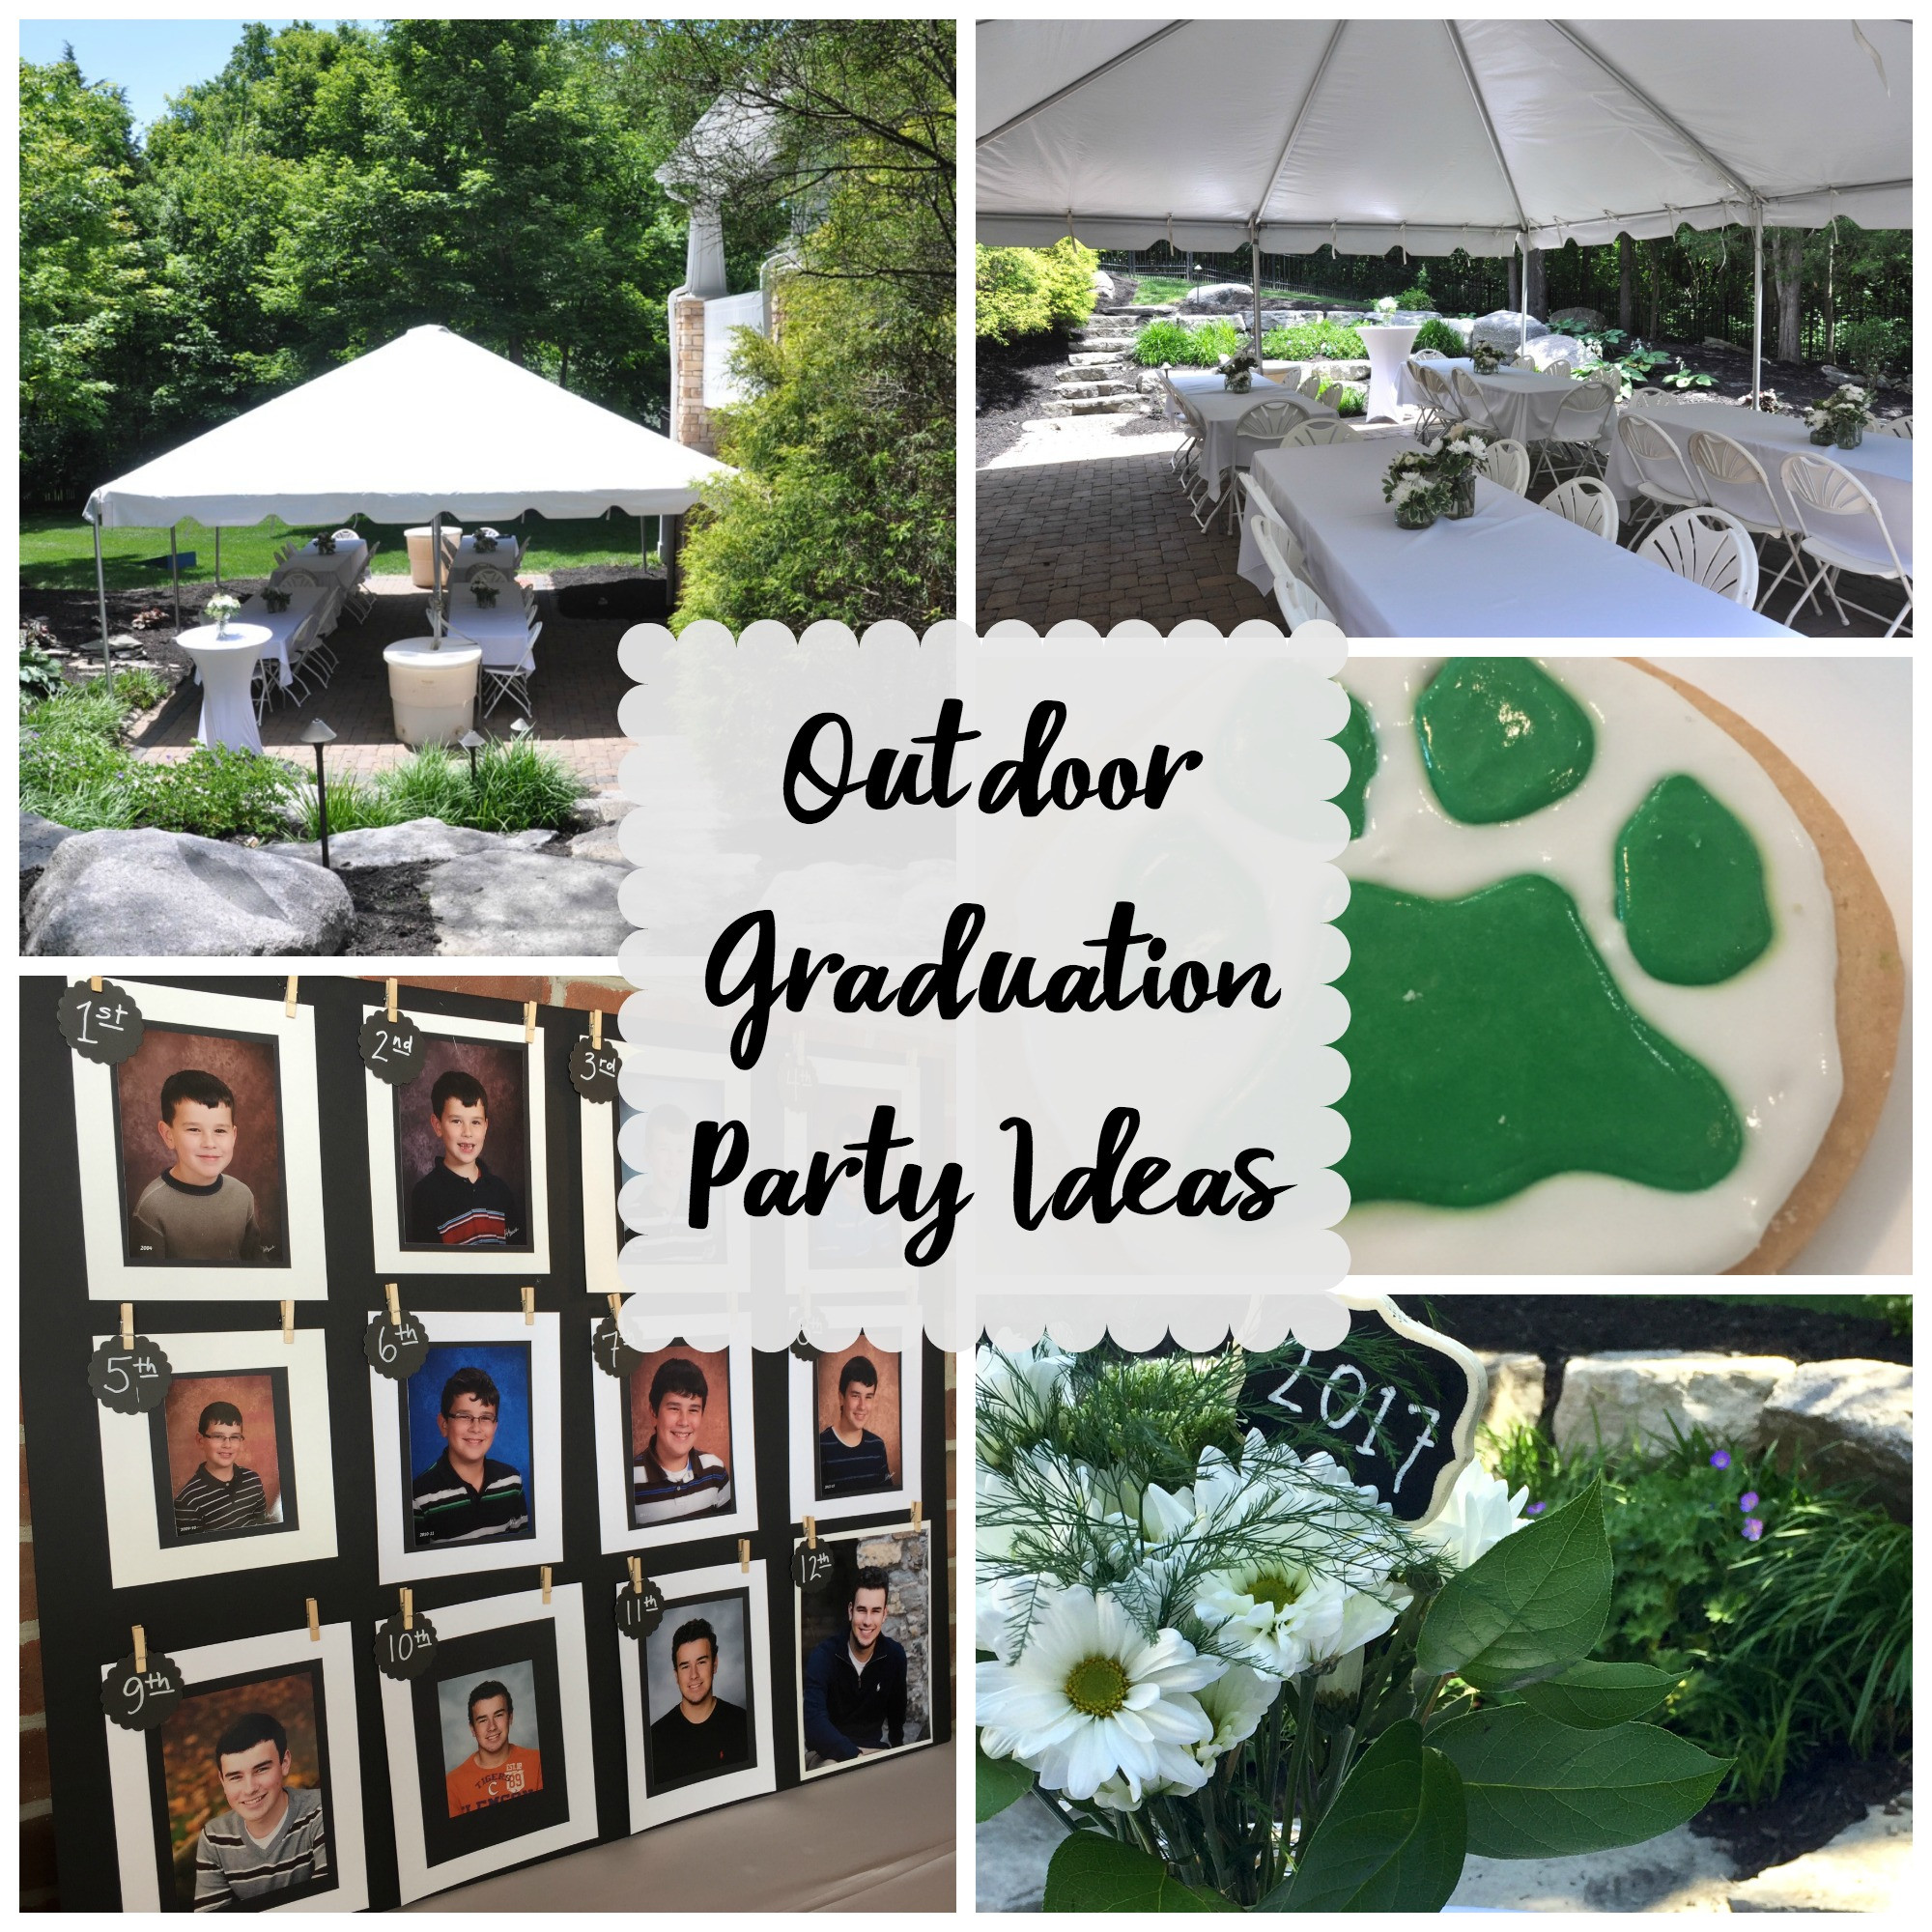 Outside Graduation Party Ideas
 Outdoor Graduation Party Evolution of Style